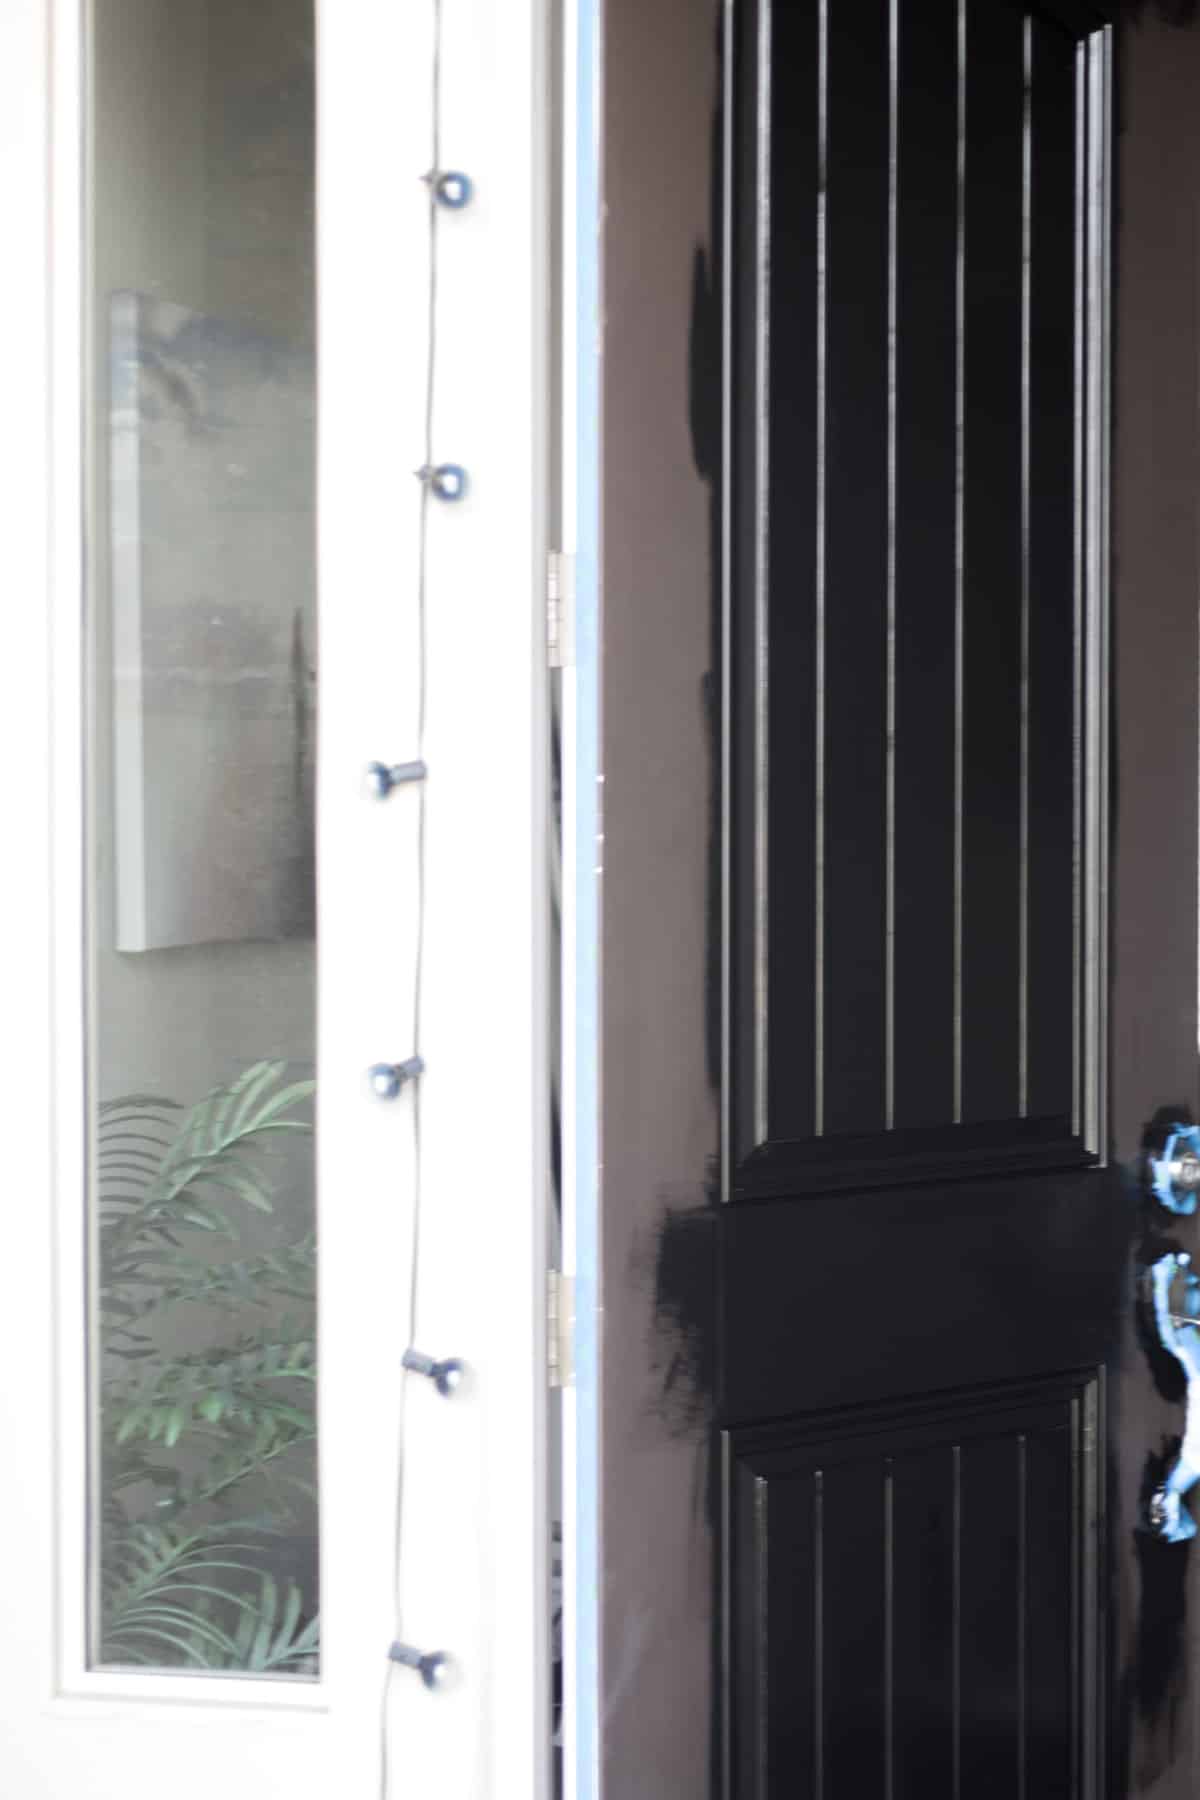 Repainting your door is really simple. It won't take you long at all and all you need to do is tape off what you don't want painted! It will make such a big difference in your curb appeal.